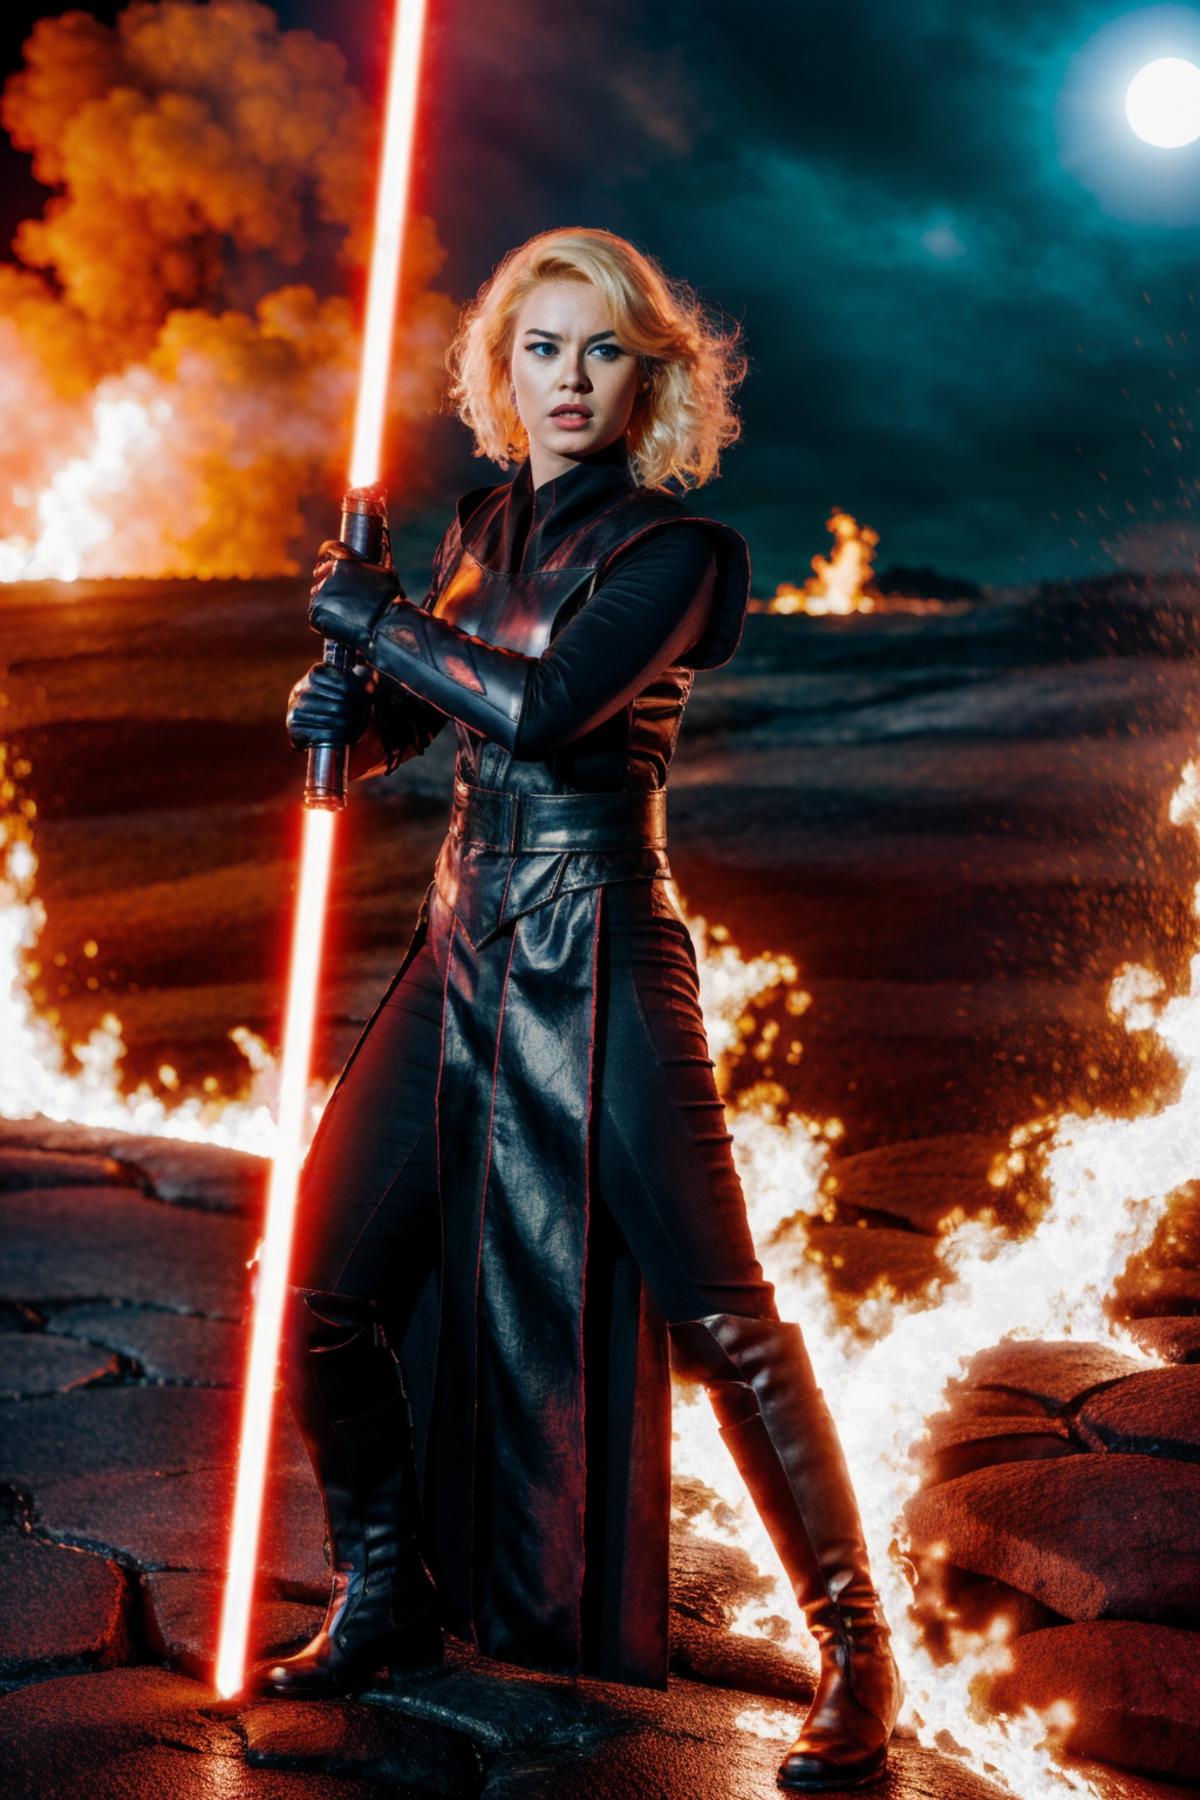 Star Wars sith outfit image by impossiblebearcl4060